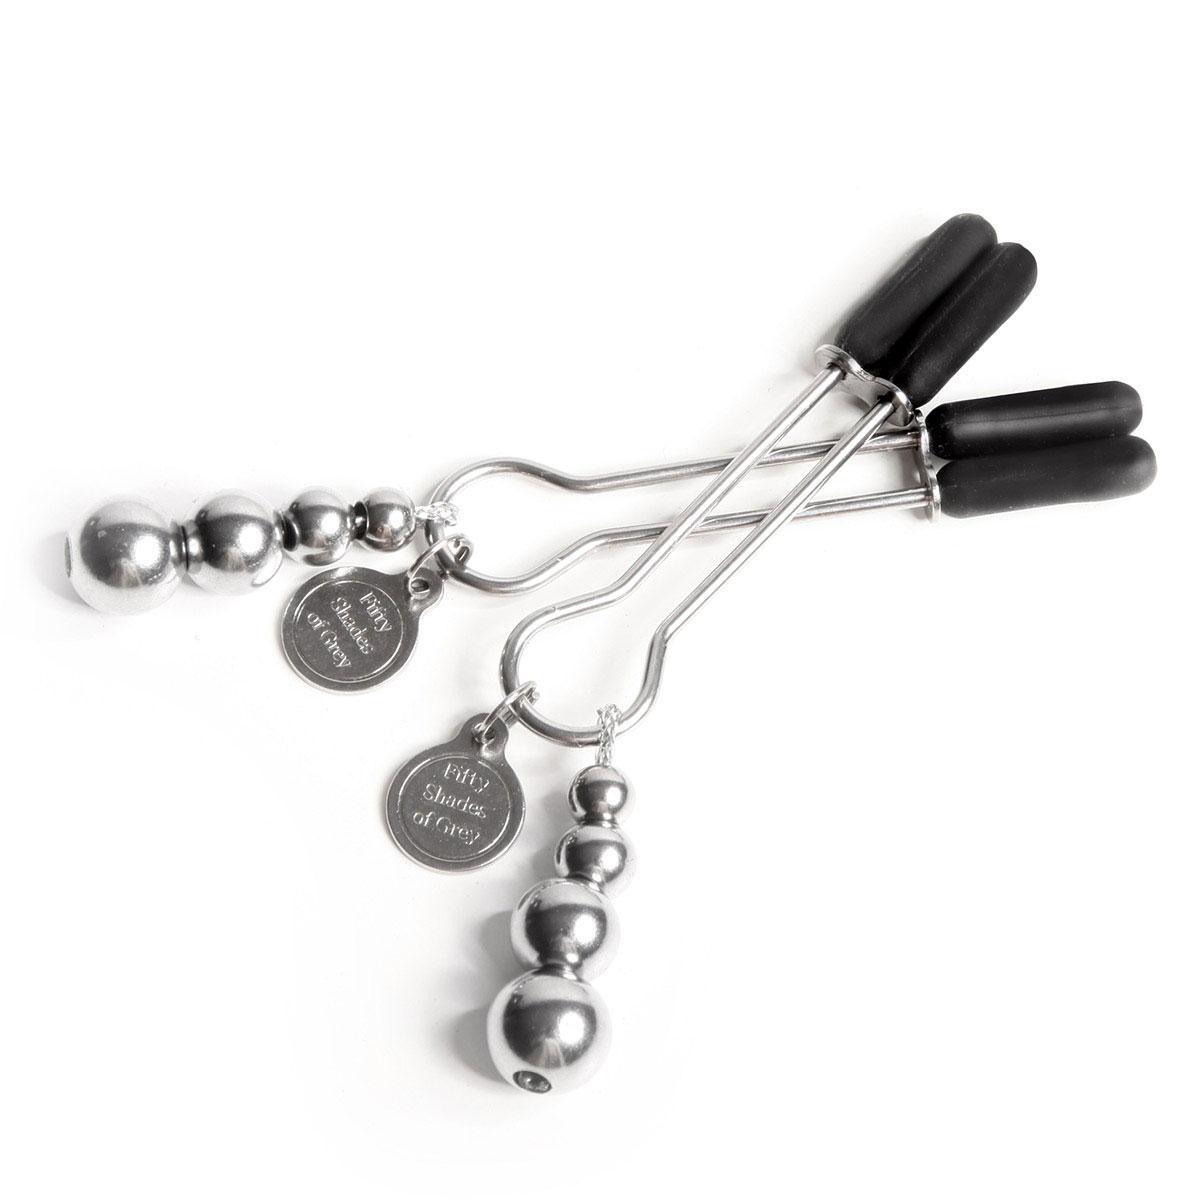 Fifty Shades - The Pinch Nipple Clamps - shop enby